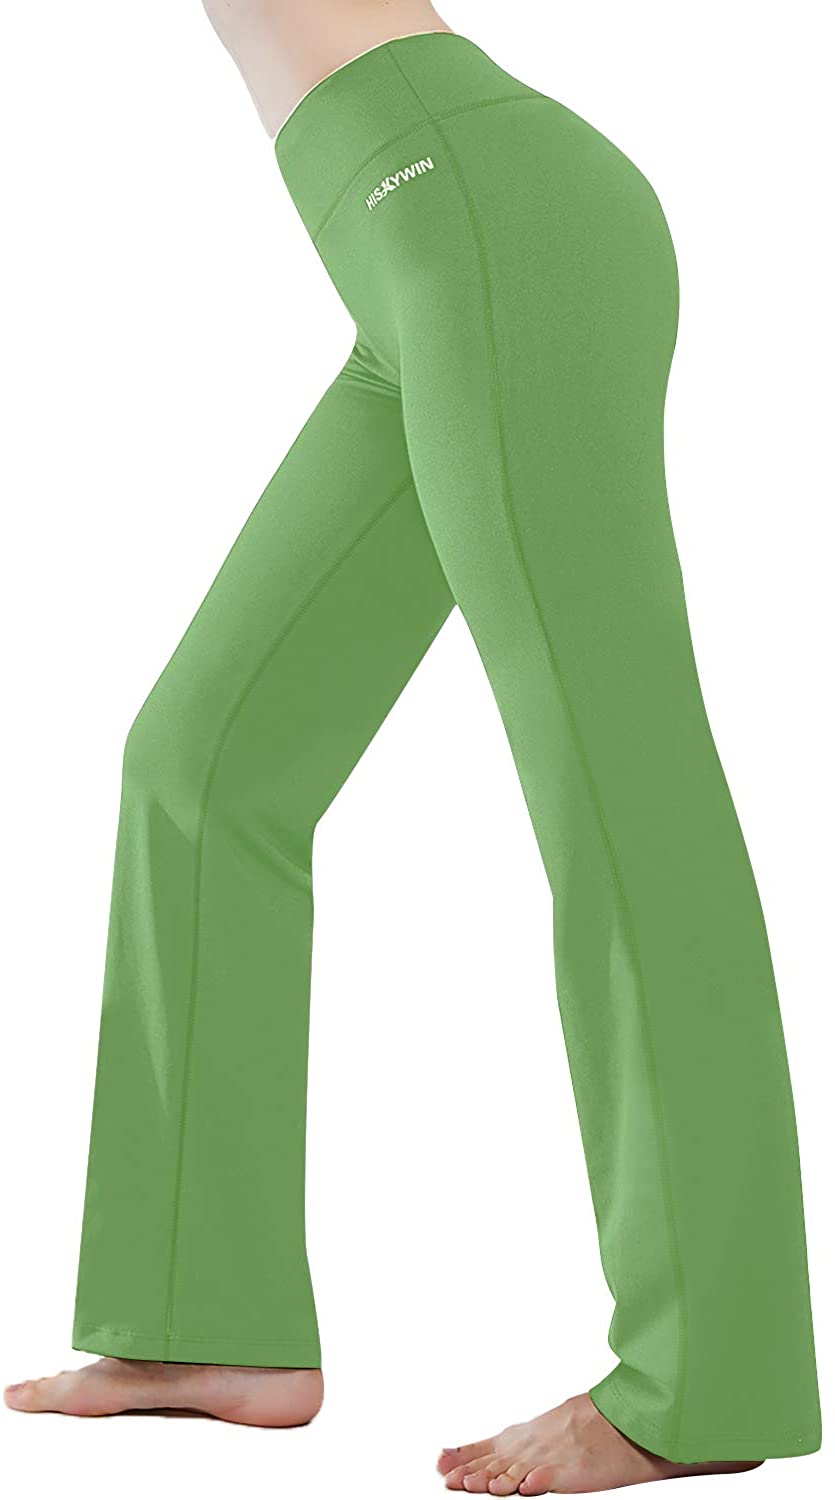  HISKYWIN Wide Leg Pants for Women Yoga Pants with